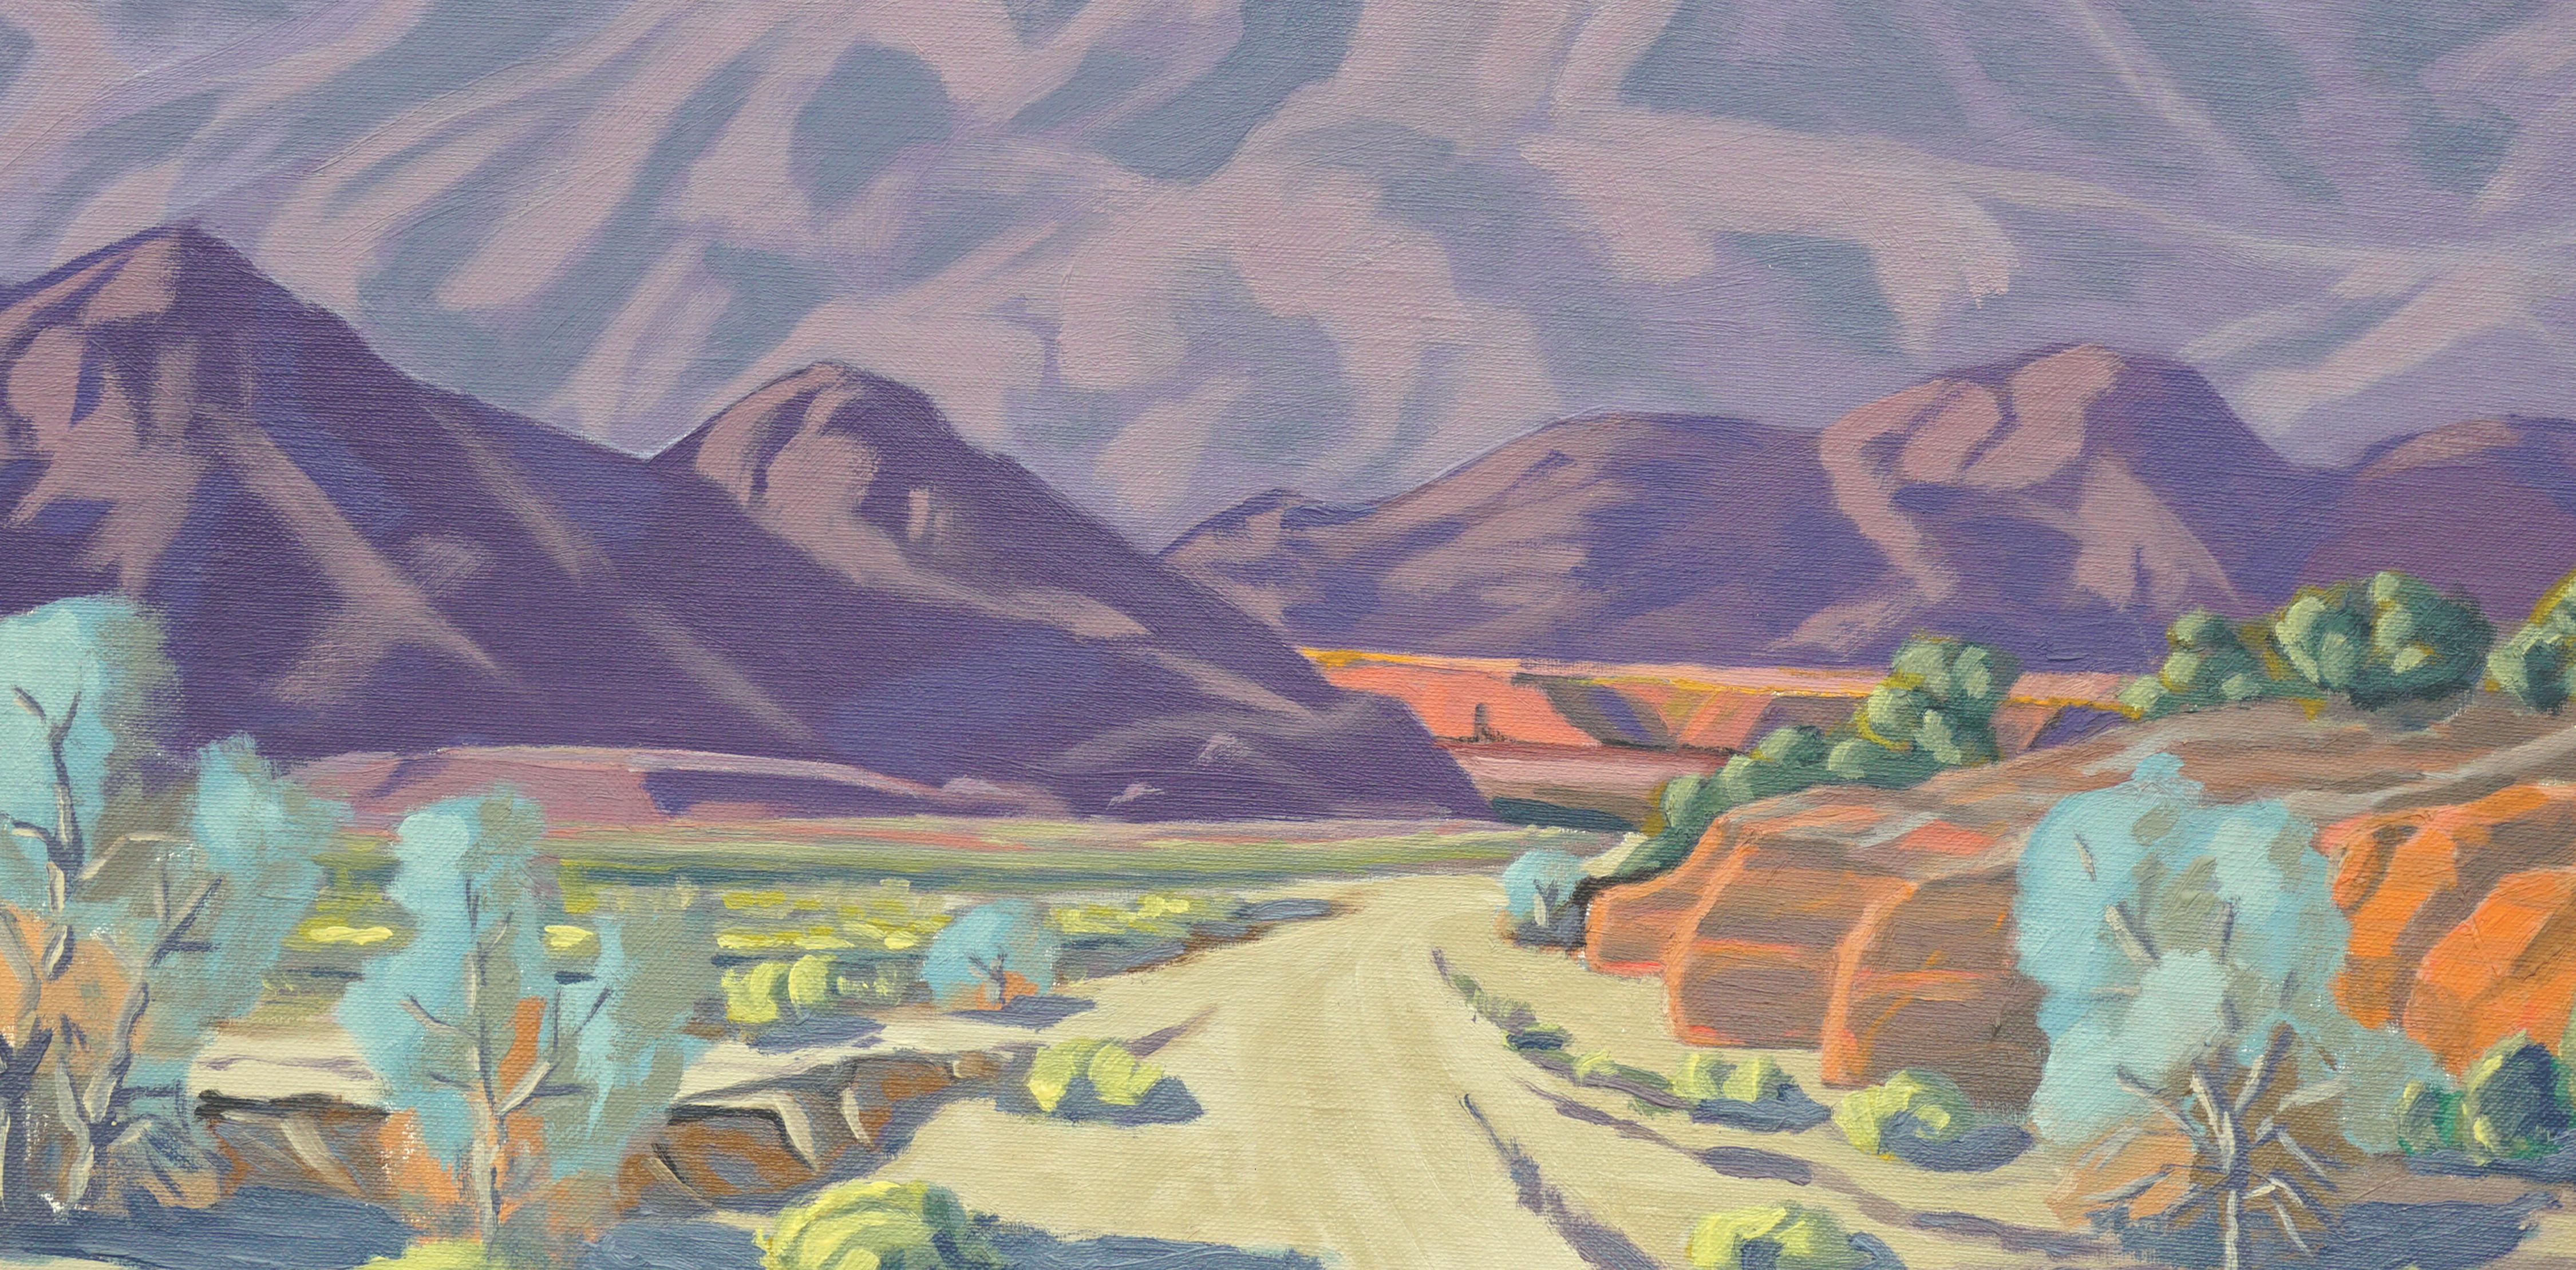 Desert Dry Lake Landscape - Painting by George W. Courtney